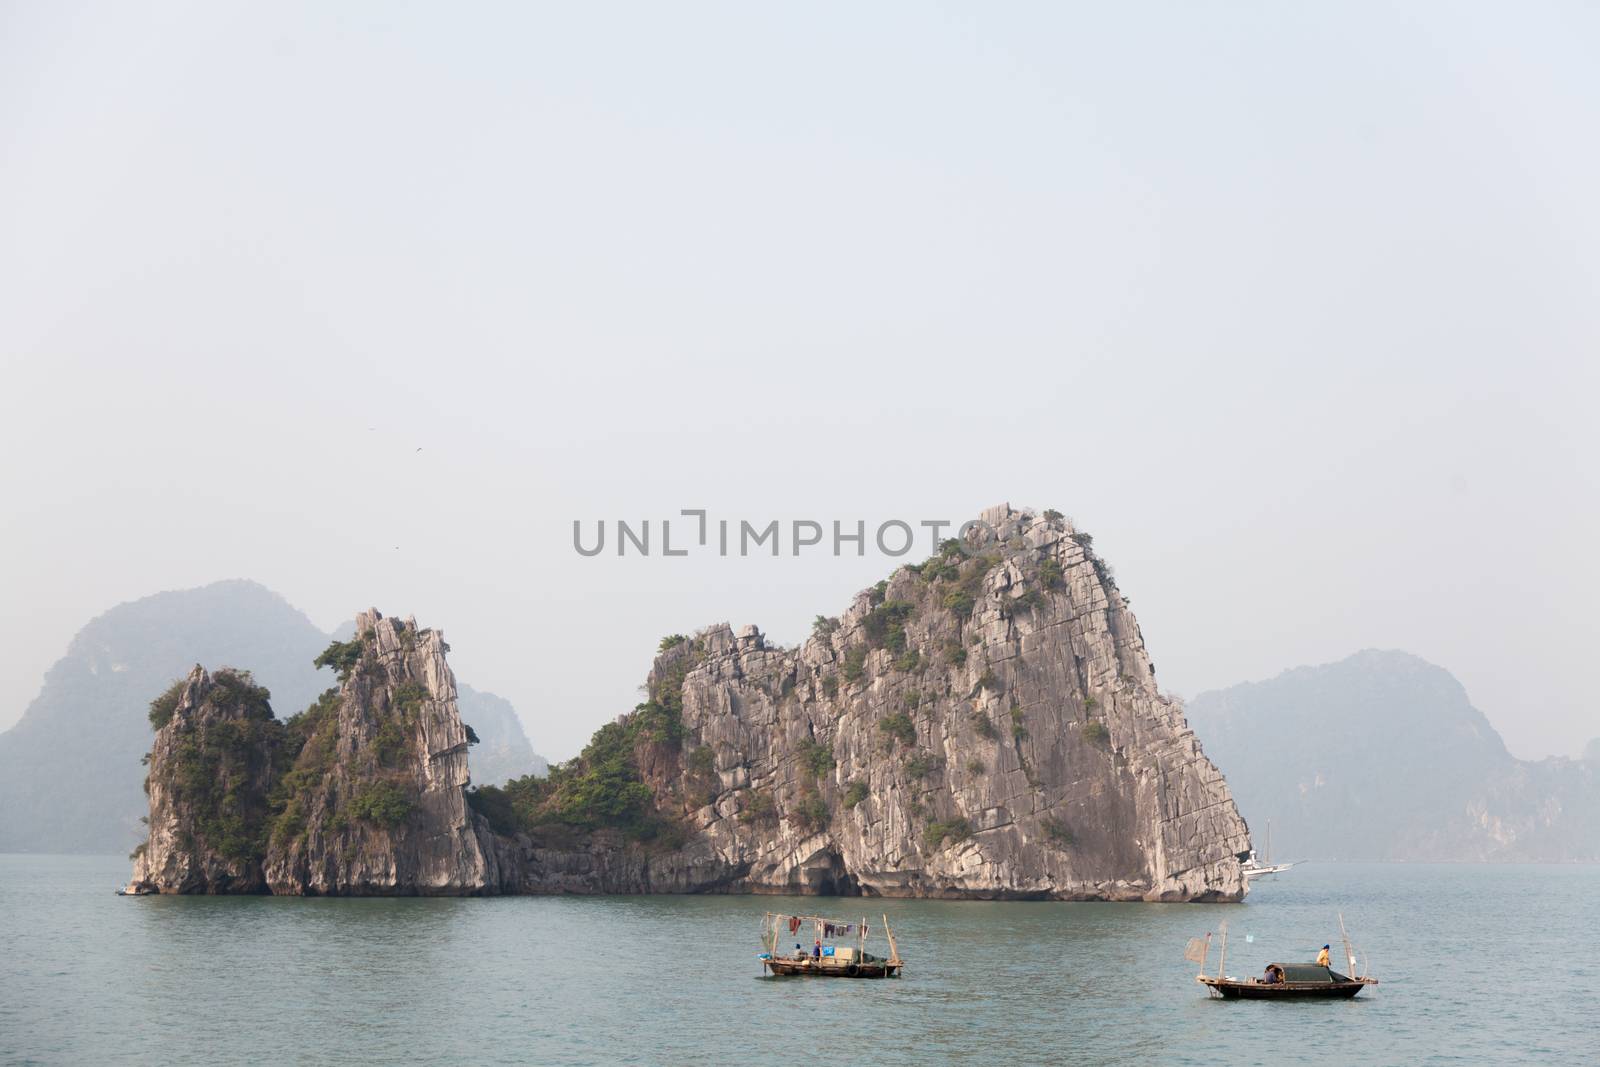 Ha Long Bay, Vietnam, is a World Heritage Site and very popular with tourists. Thousands of towering limestone islands topped by rainforests rising up out of the emerald seas. Cruise ships take tourists for day trips and overnight stays in the bay. Traditional fishing boats in the seas, . High quality photo